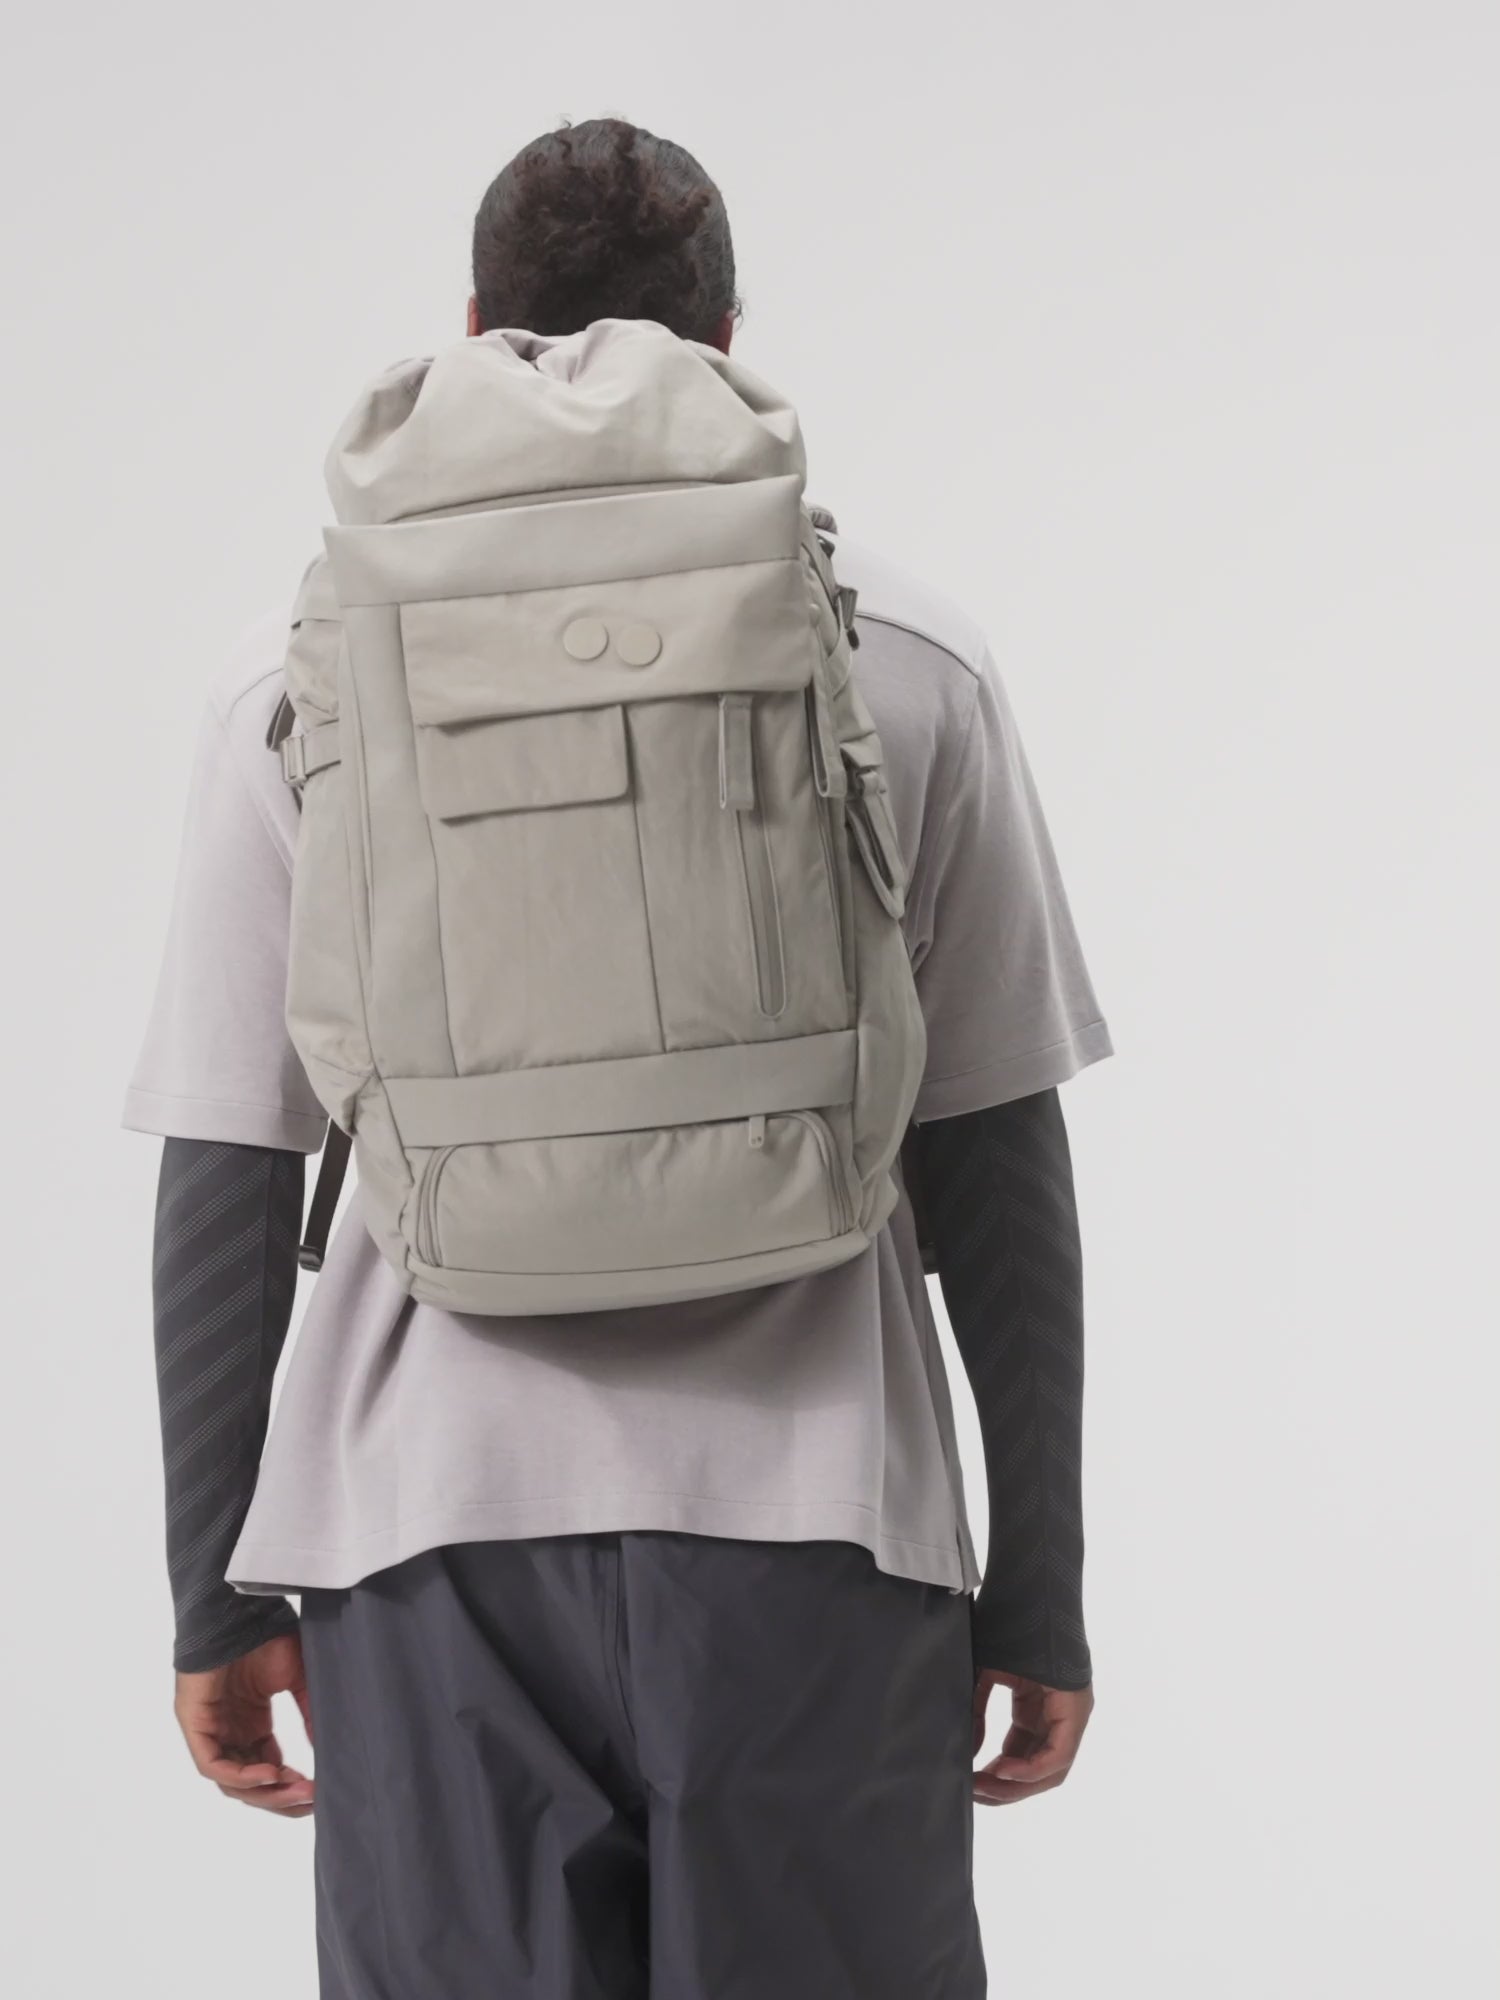 pinqponq-backpack-Blok-Large-Crinkle-Taupe-model-video